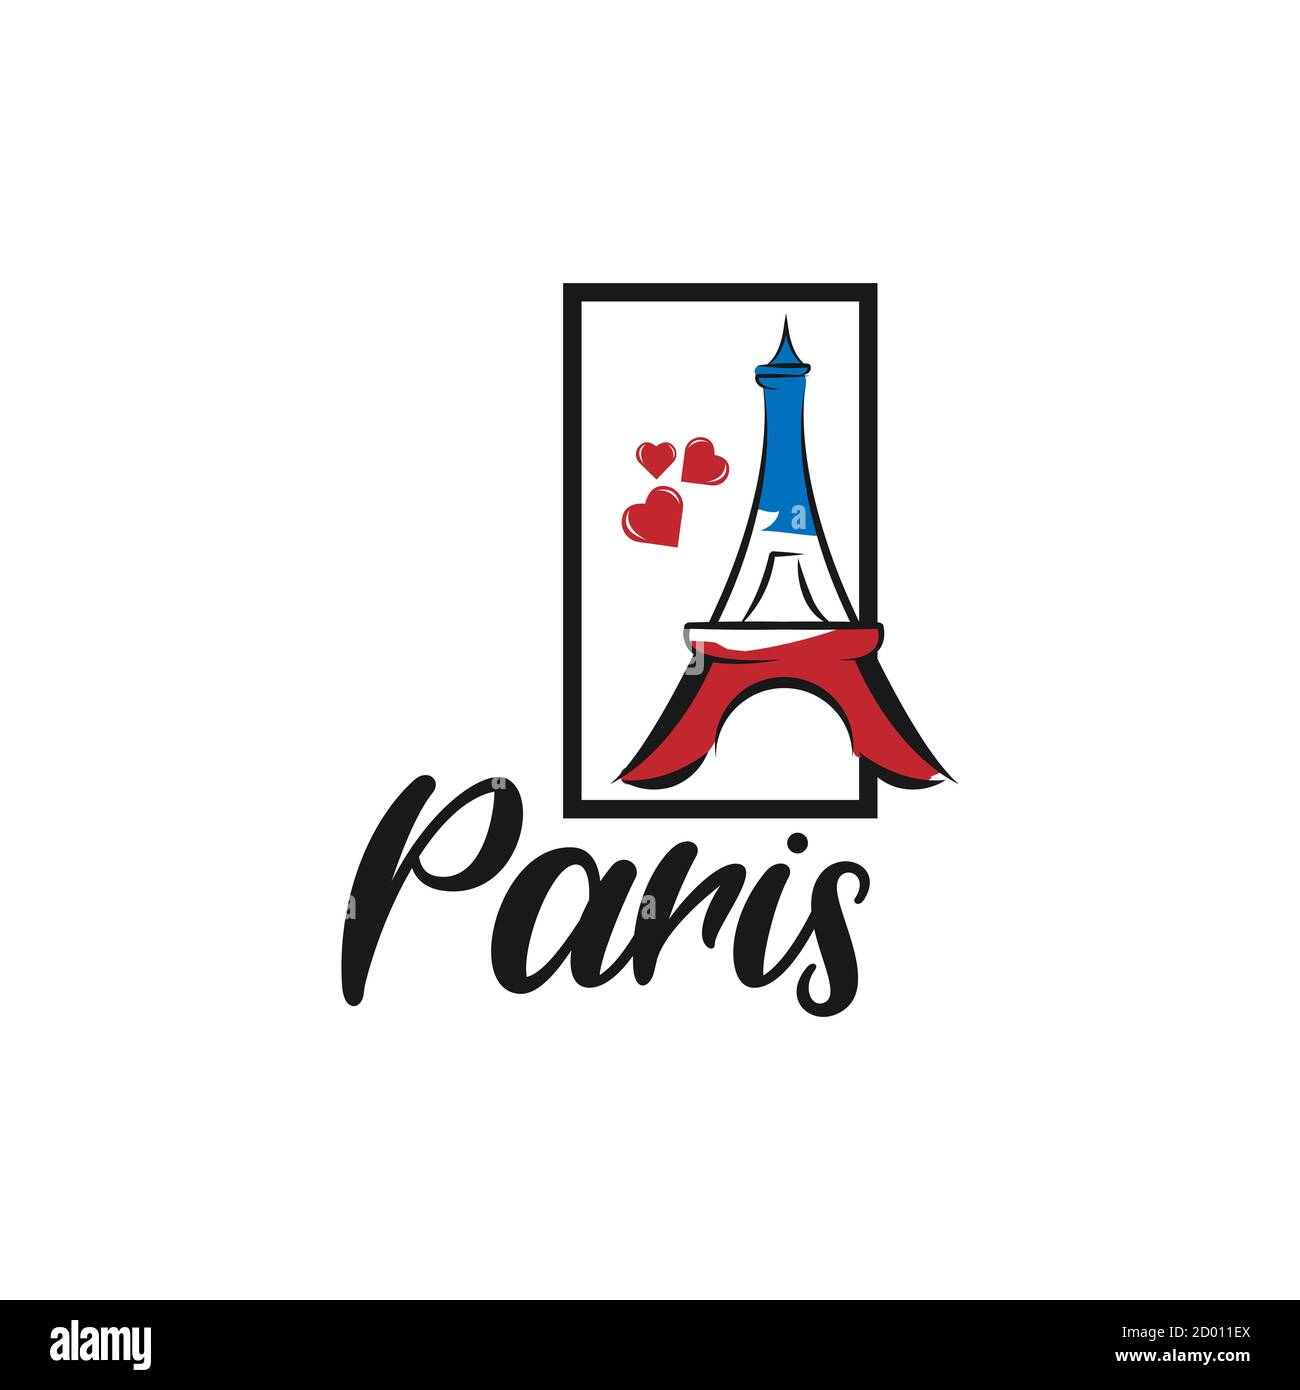 Beautiful hand written text typography design of europe european city paris name logo with red heart suitable for tourism or visit promotion Stock Vector